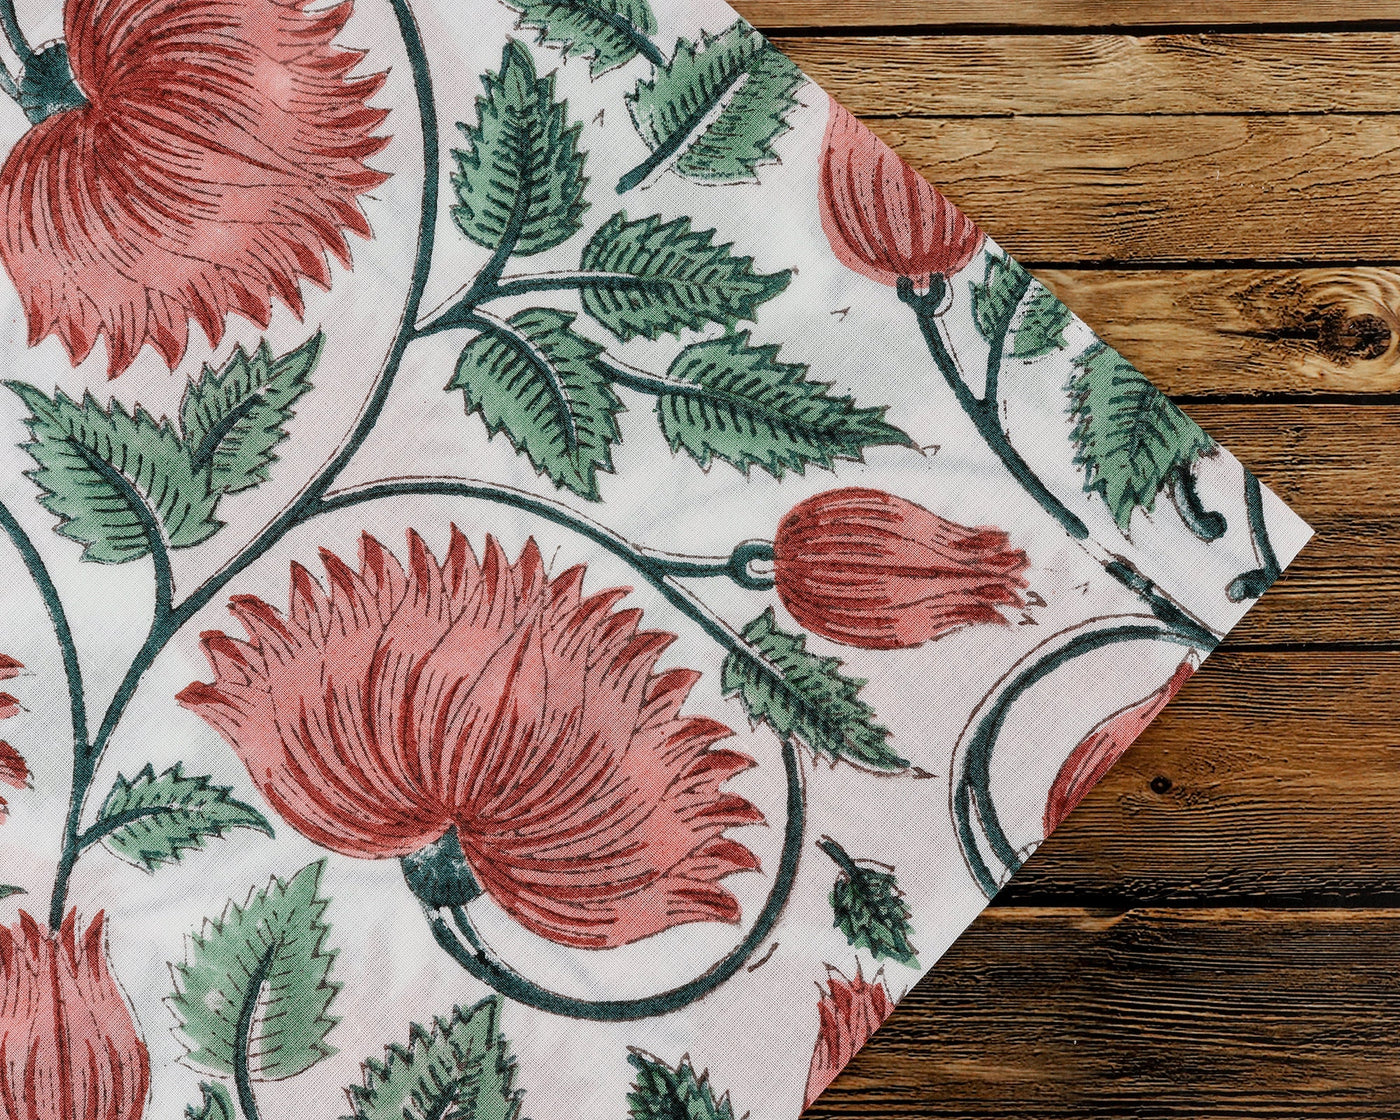 Fabricrush Light Coral and Light Russian Green Indian Floral Hand Block Printed Cotton Cloth Napkins, 18x18"- Cocktail Napkins, 20x20"- Dinner Napkins